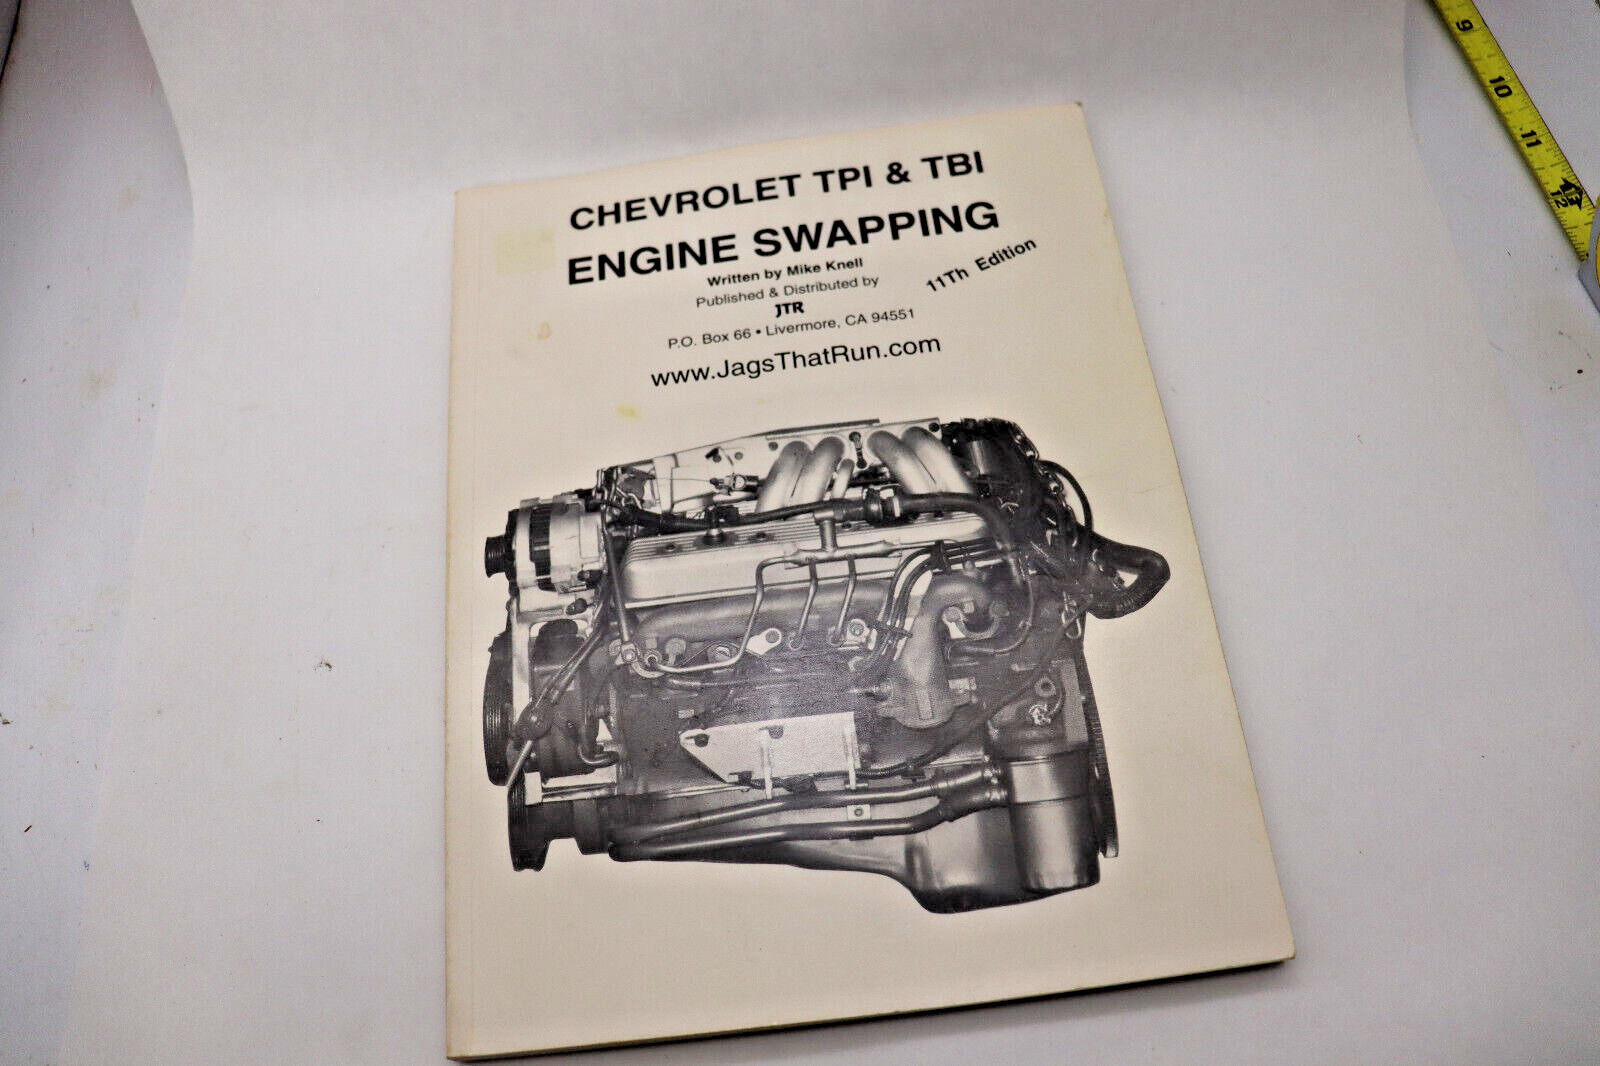 CHEVROLET TPI & TBI ENGINE SWAPPING - Very good - Mike Knell - 11th edition 